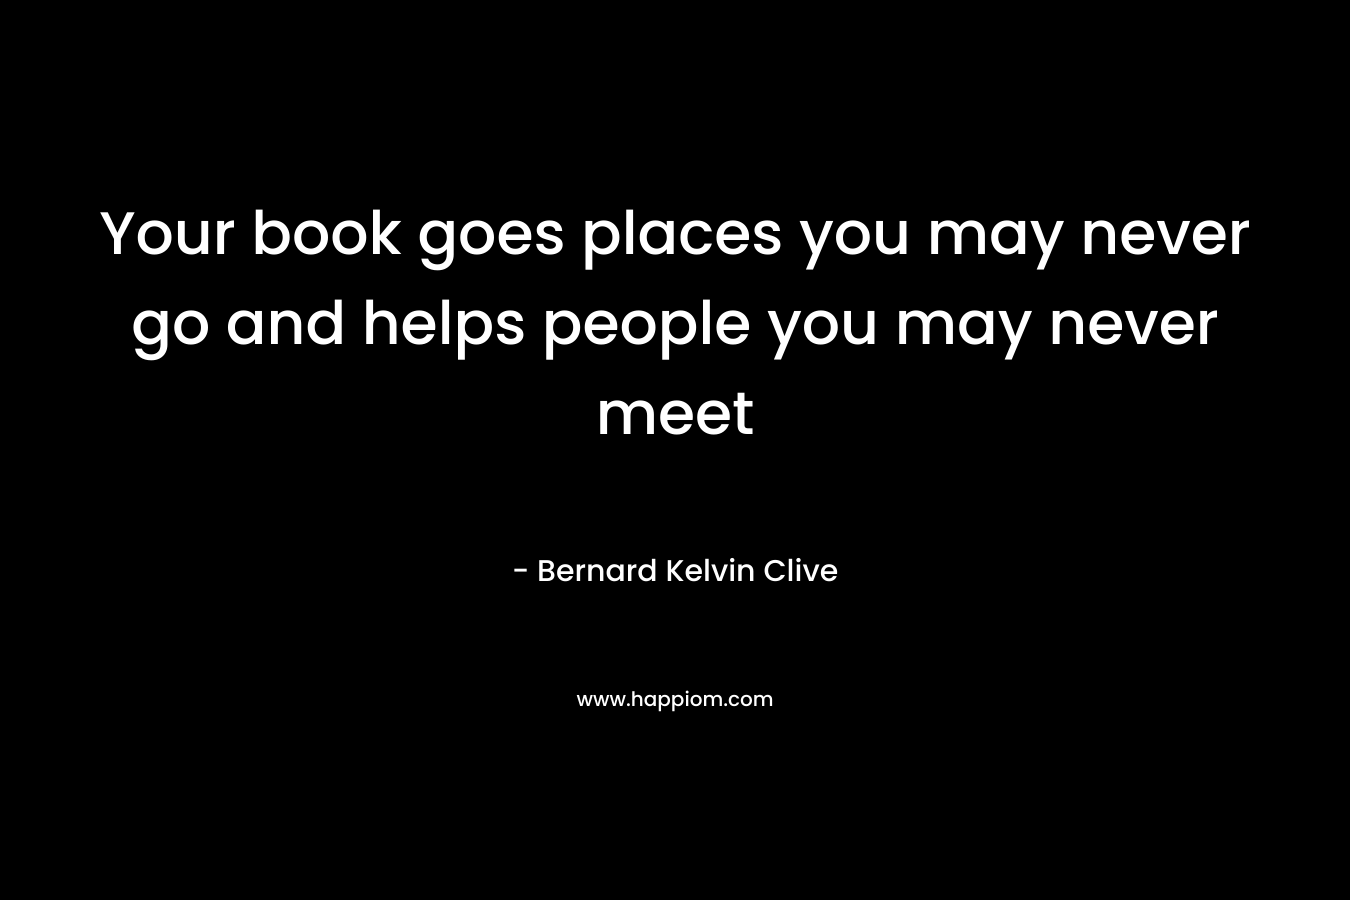 Your book goes places you may never go and helps people you may never meet